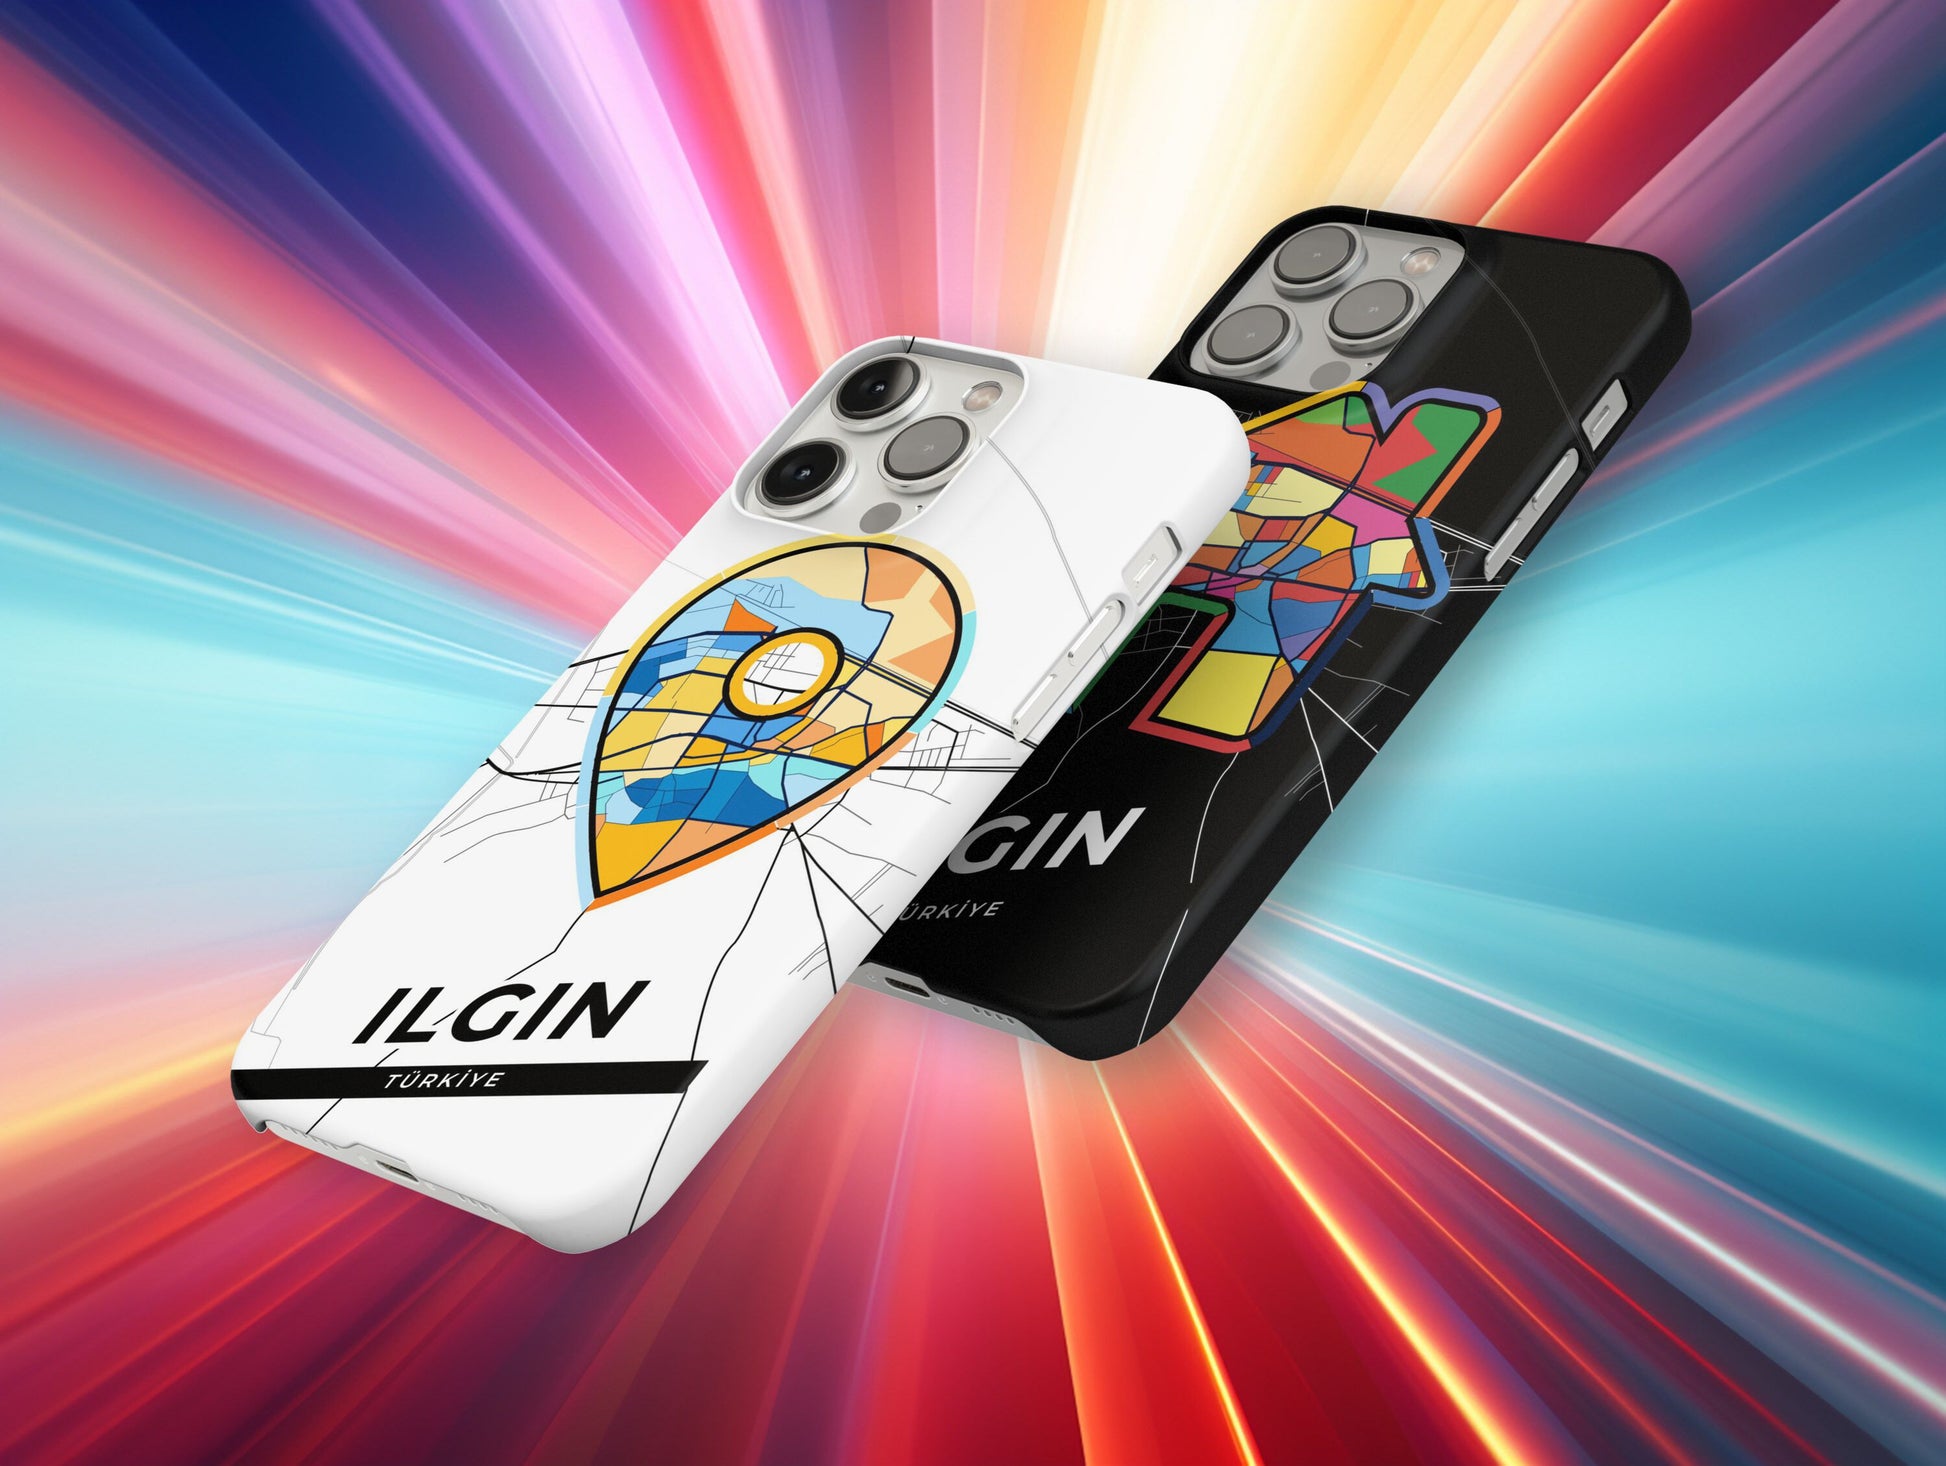 Ilgın Turkey slim phone case with colorful icon. Birthday, wedding or housewarming gift. Couple match cases.